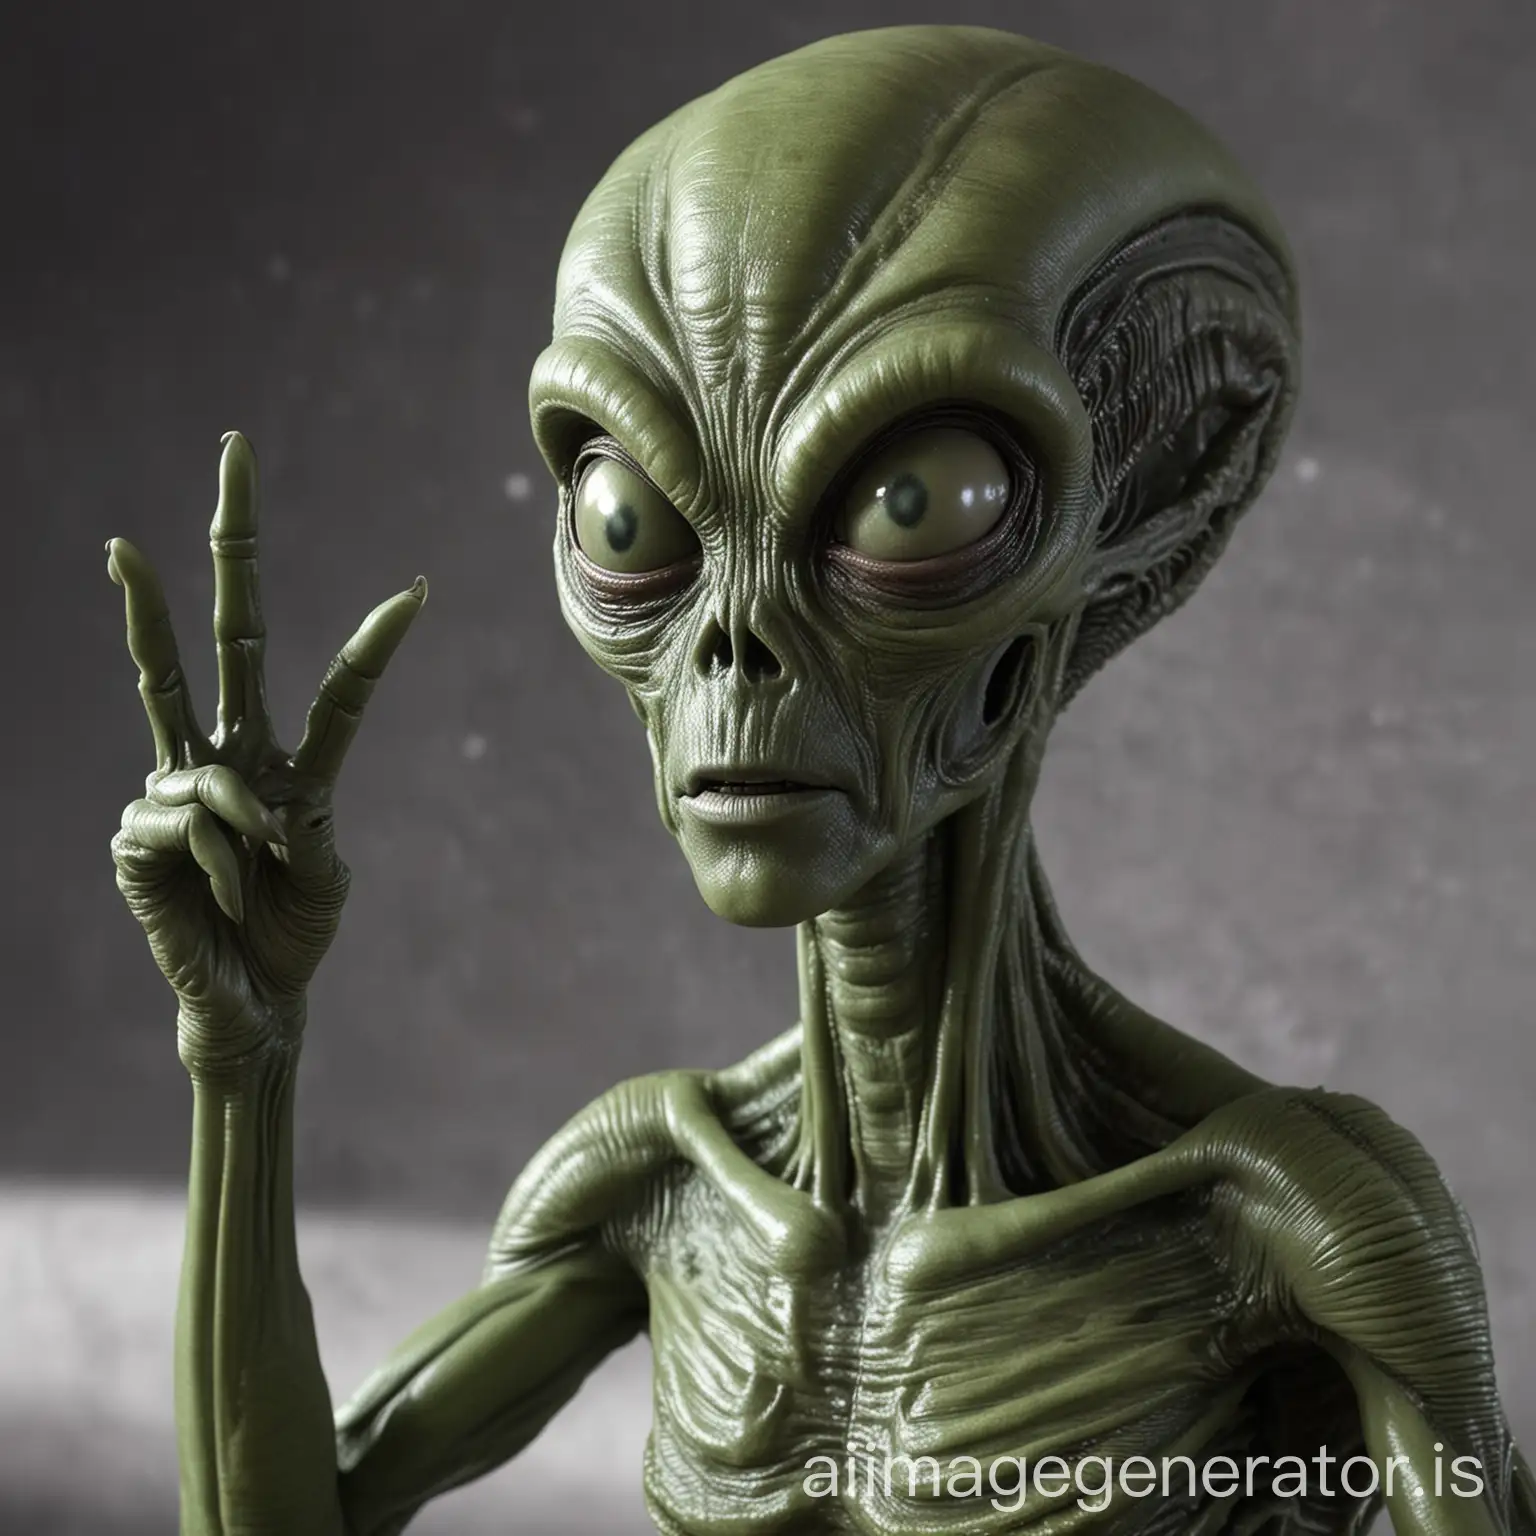 Alien-Expressing-Opinion-on-Extraterrestrial-Politics